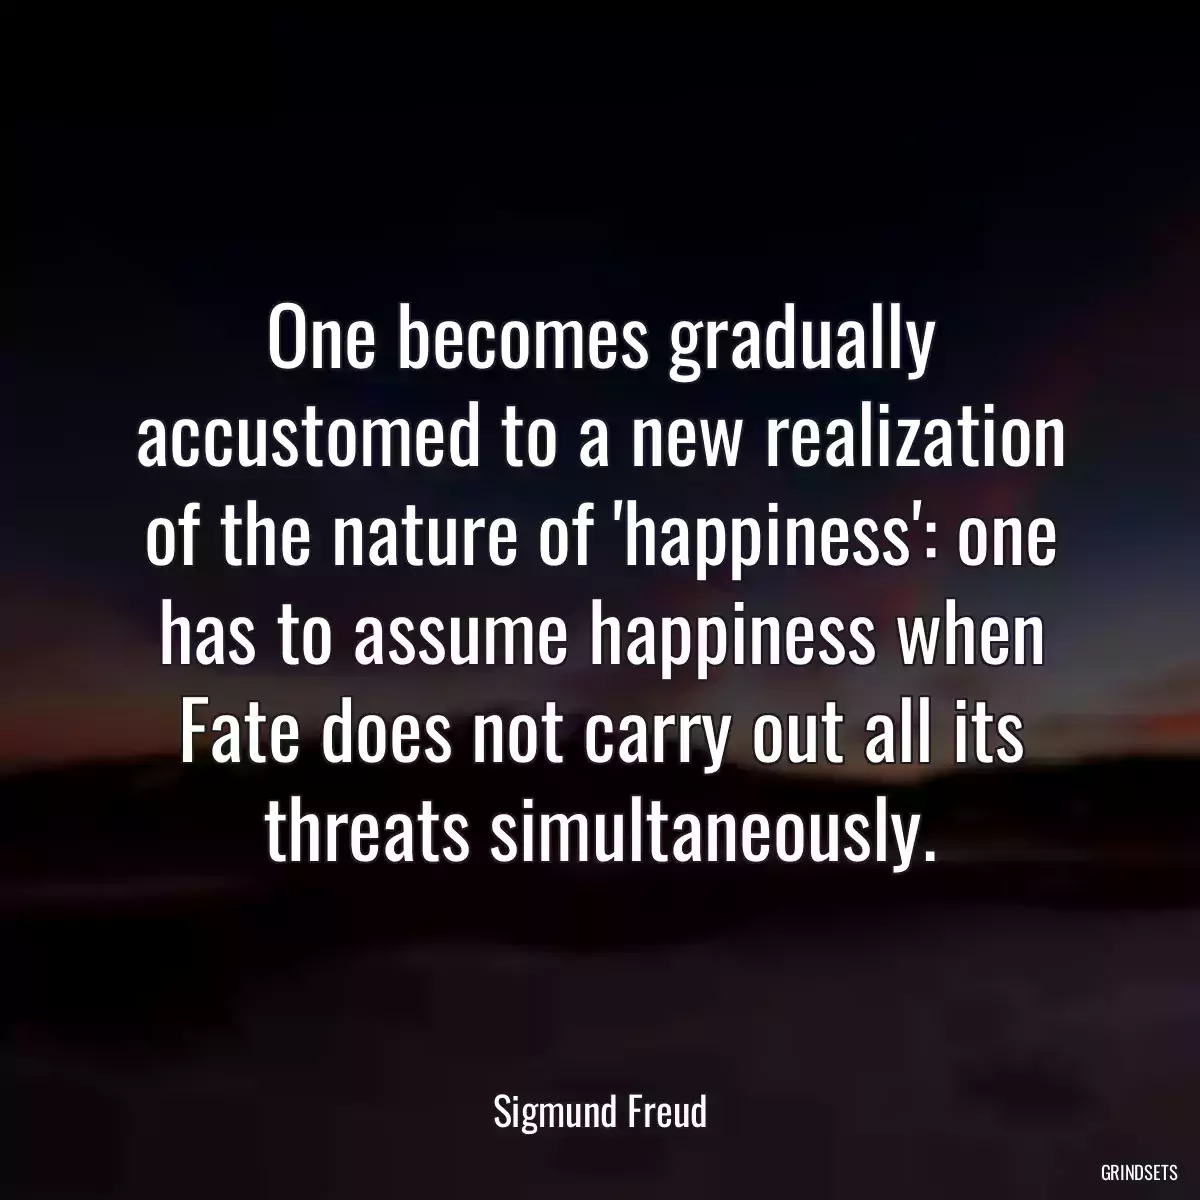 One becomes gradually accustomed to a new realization of the nature of \'happiness\': one has to assume happiness when Fate does not carry out all its threats simultaneously.